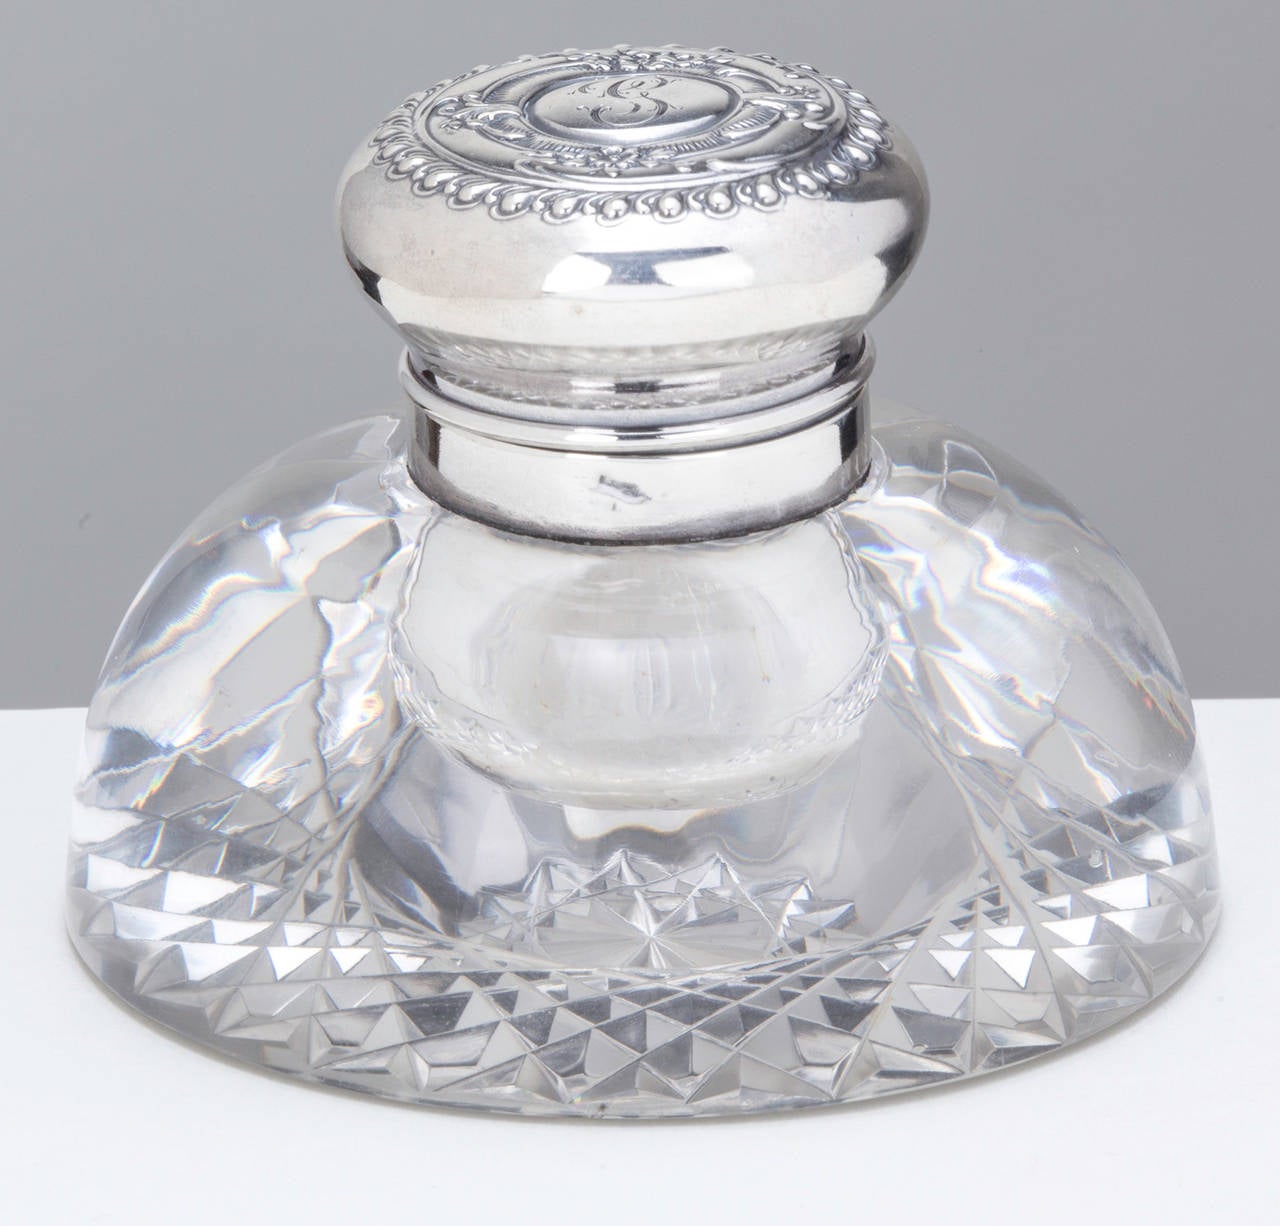 Round crystal ink bottle with sterling hinged lid. Nice monogram on the lid.  Hallmark on the neck.  It is 3.5